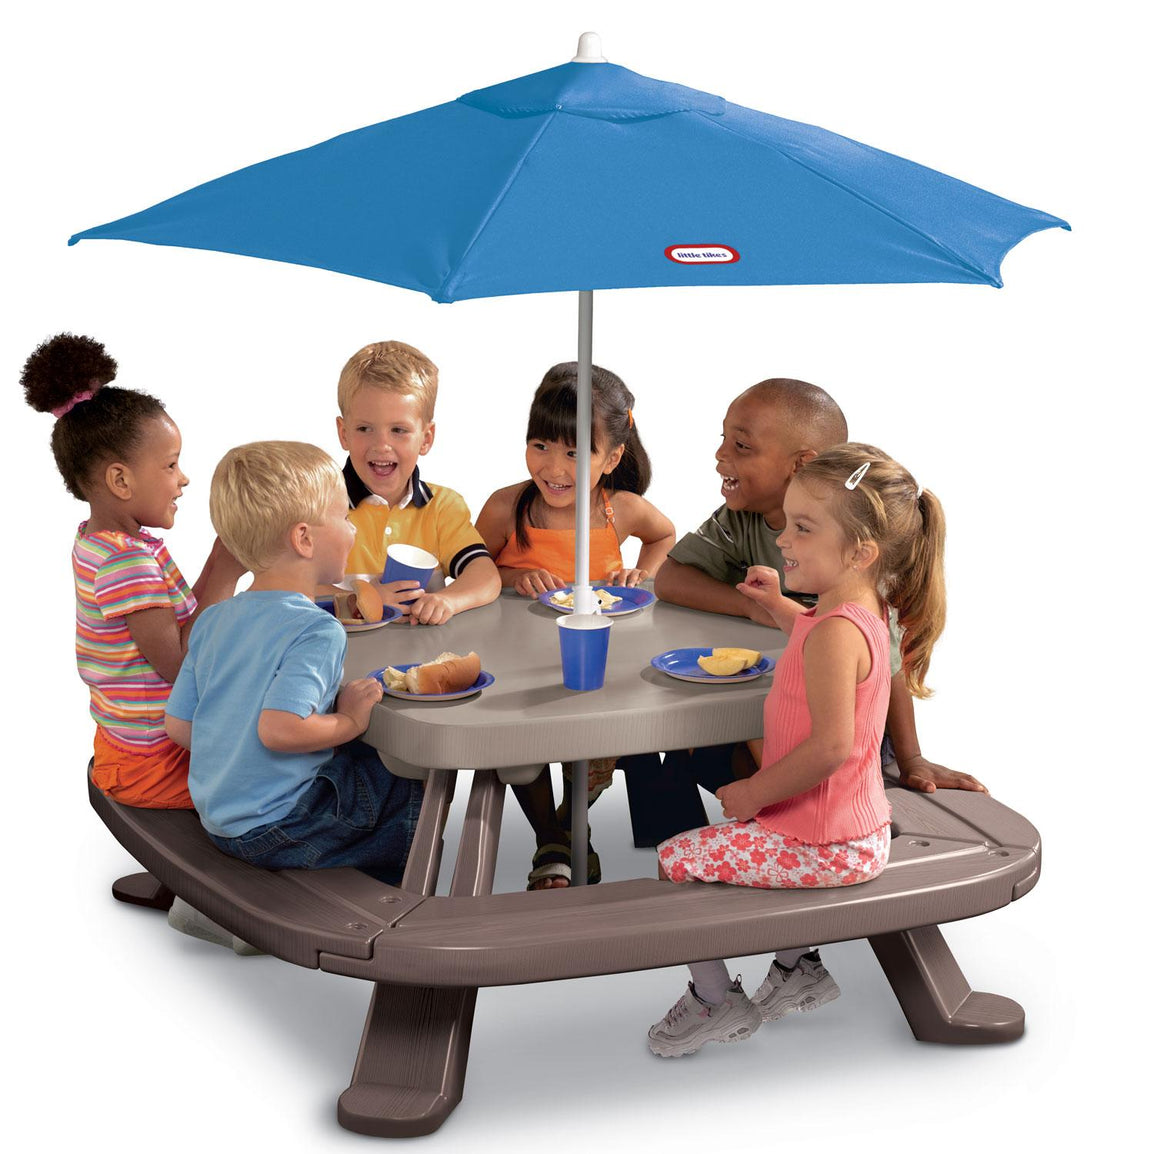 This unique 4-sided table seats up to 8 kids